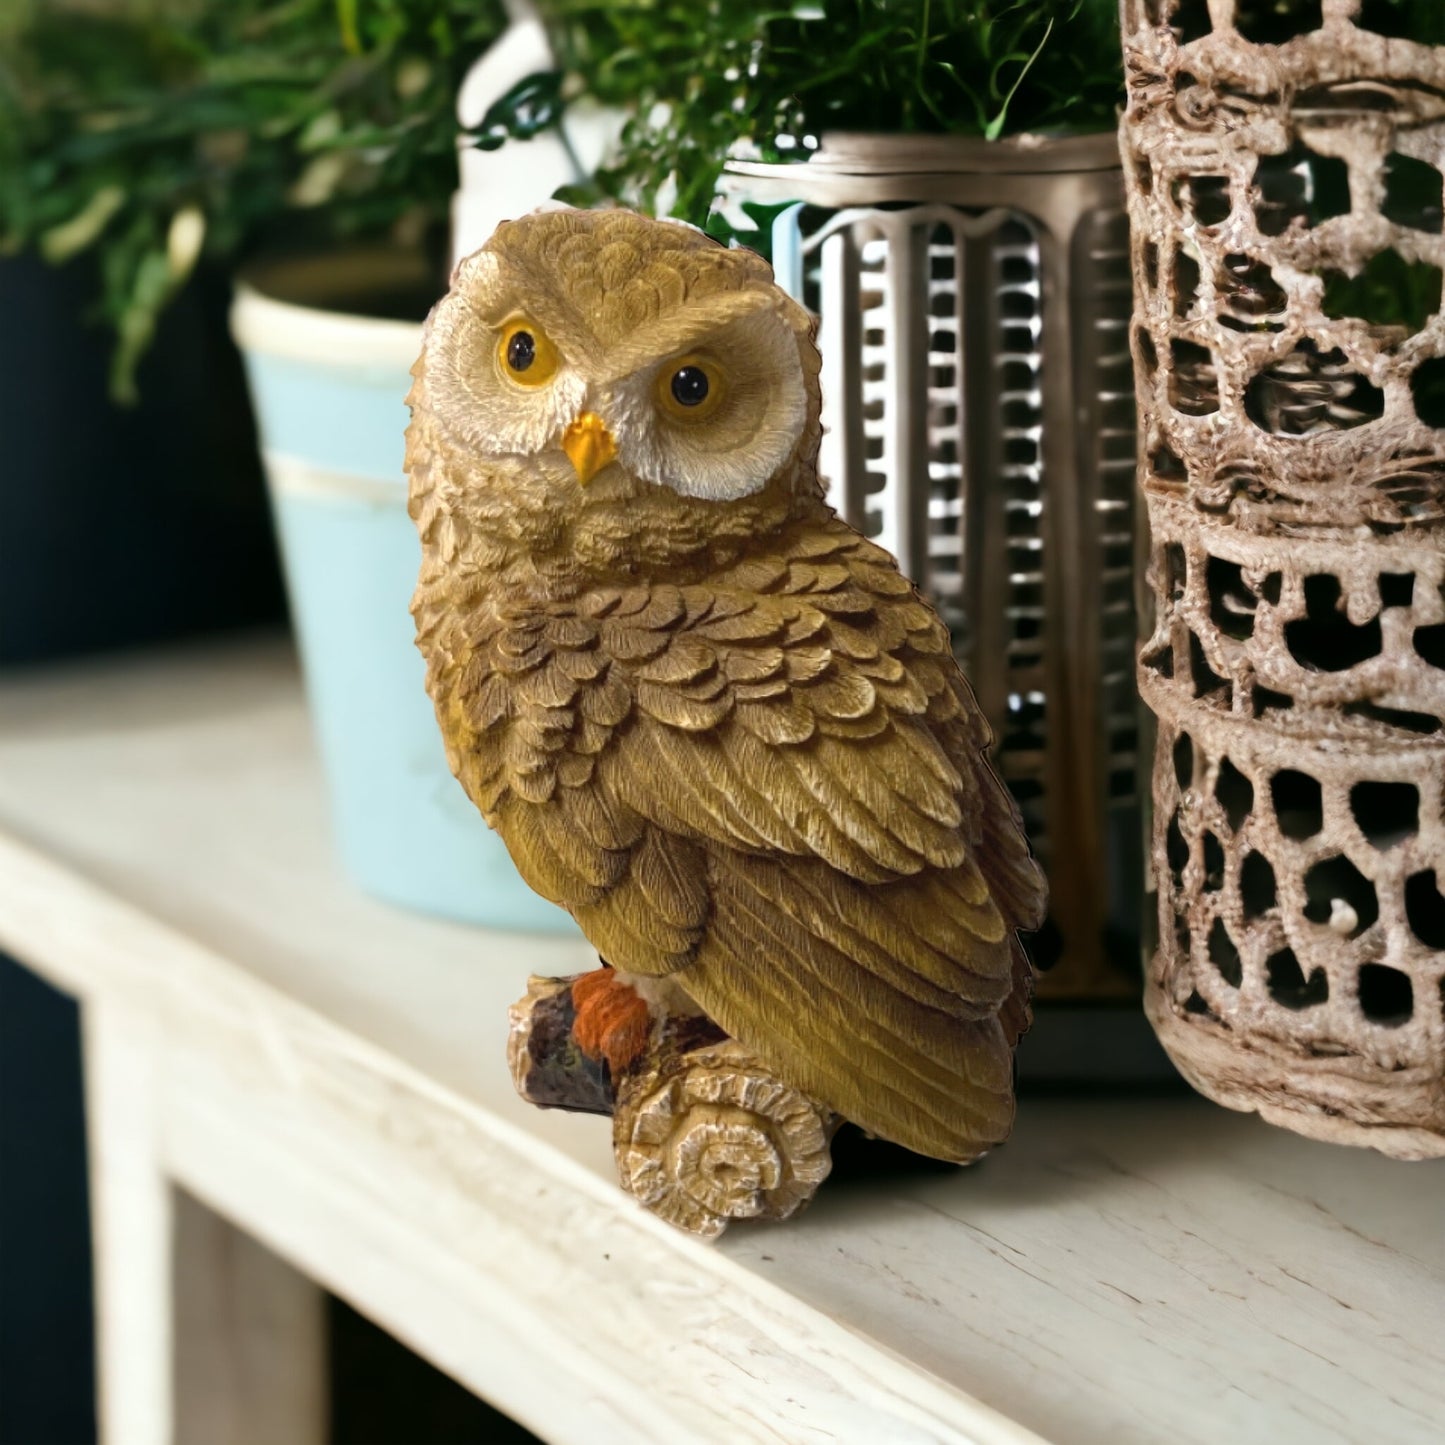 Owl Realistic Wild Bird Ornament - The Renmy Store Homewares & Gifts 